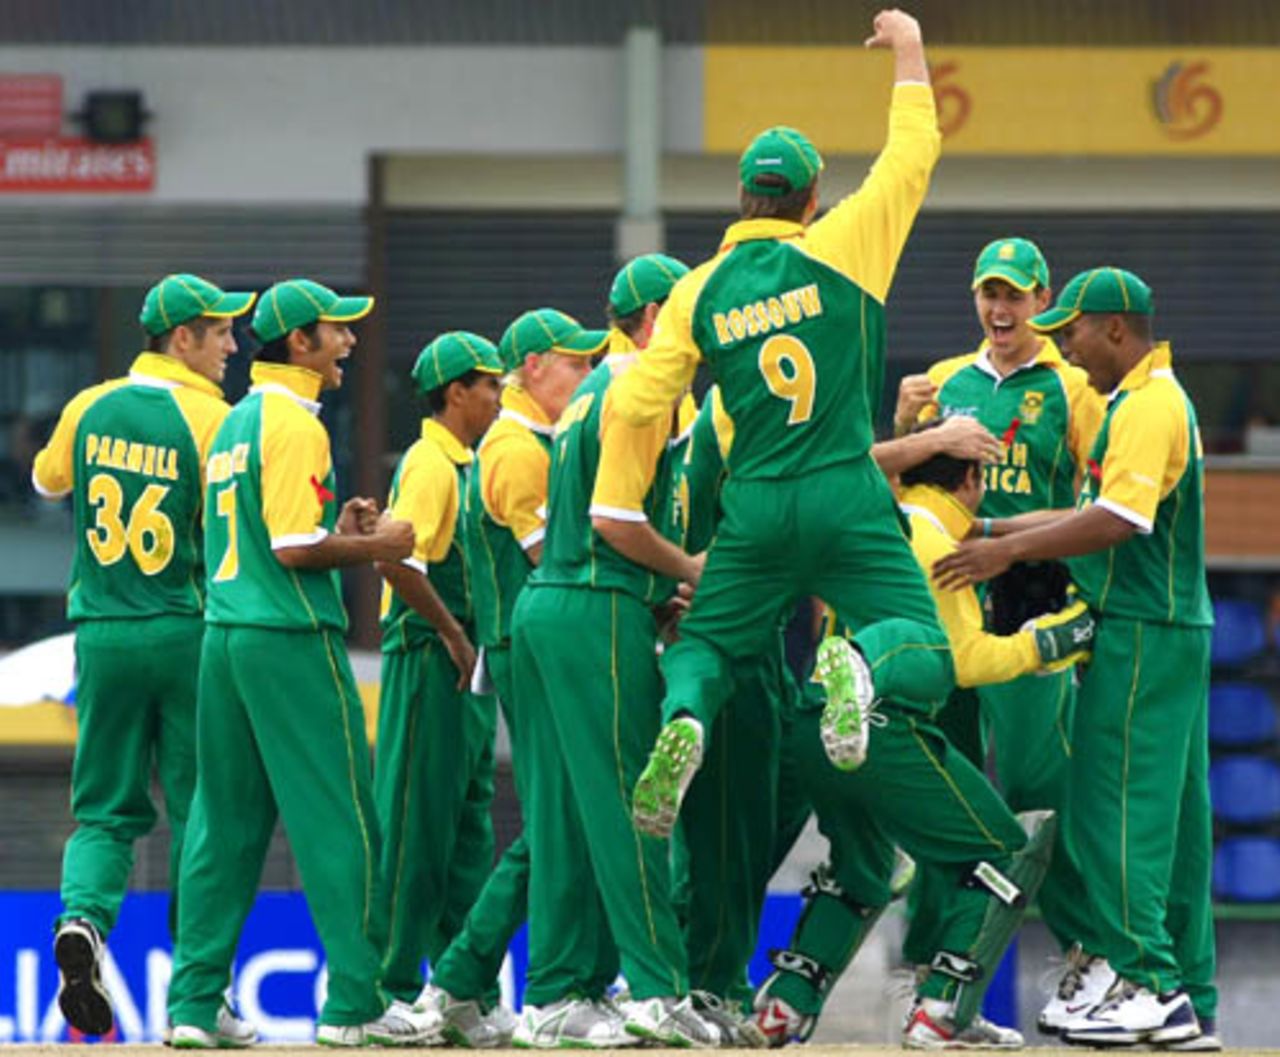 South Africa celebrate after their win, Pakistan v South Africa, 2nd semi-final, Under-19 World Cup, Kuala Lumpur, March 1, 2008 